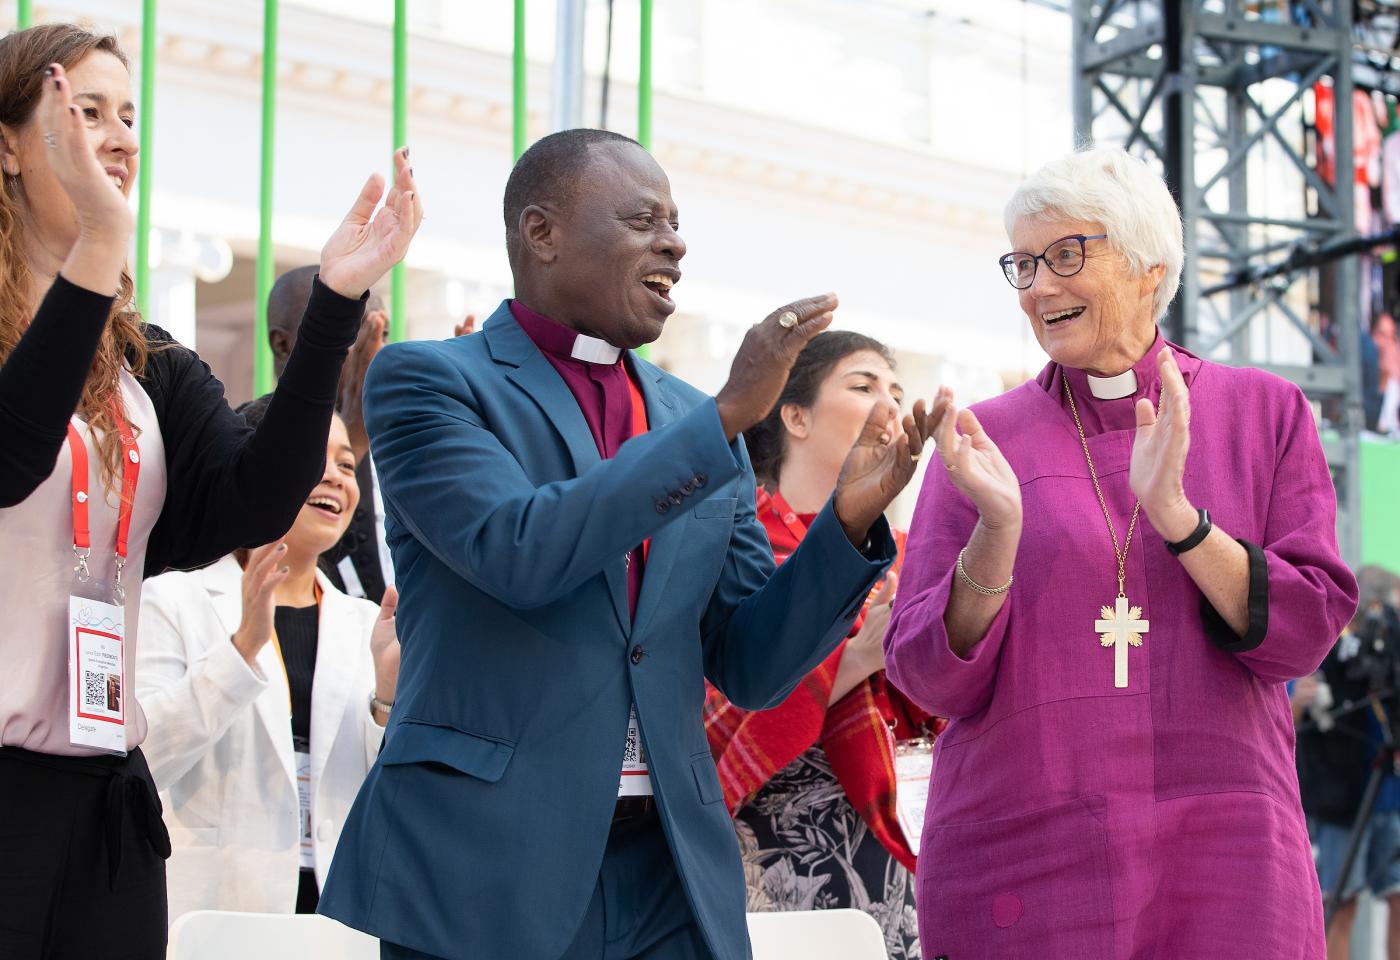 Prayer leaders dance during the morning prayer at the WCC 11th Assembly